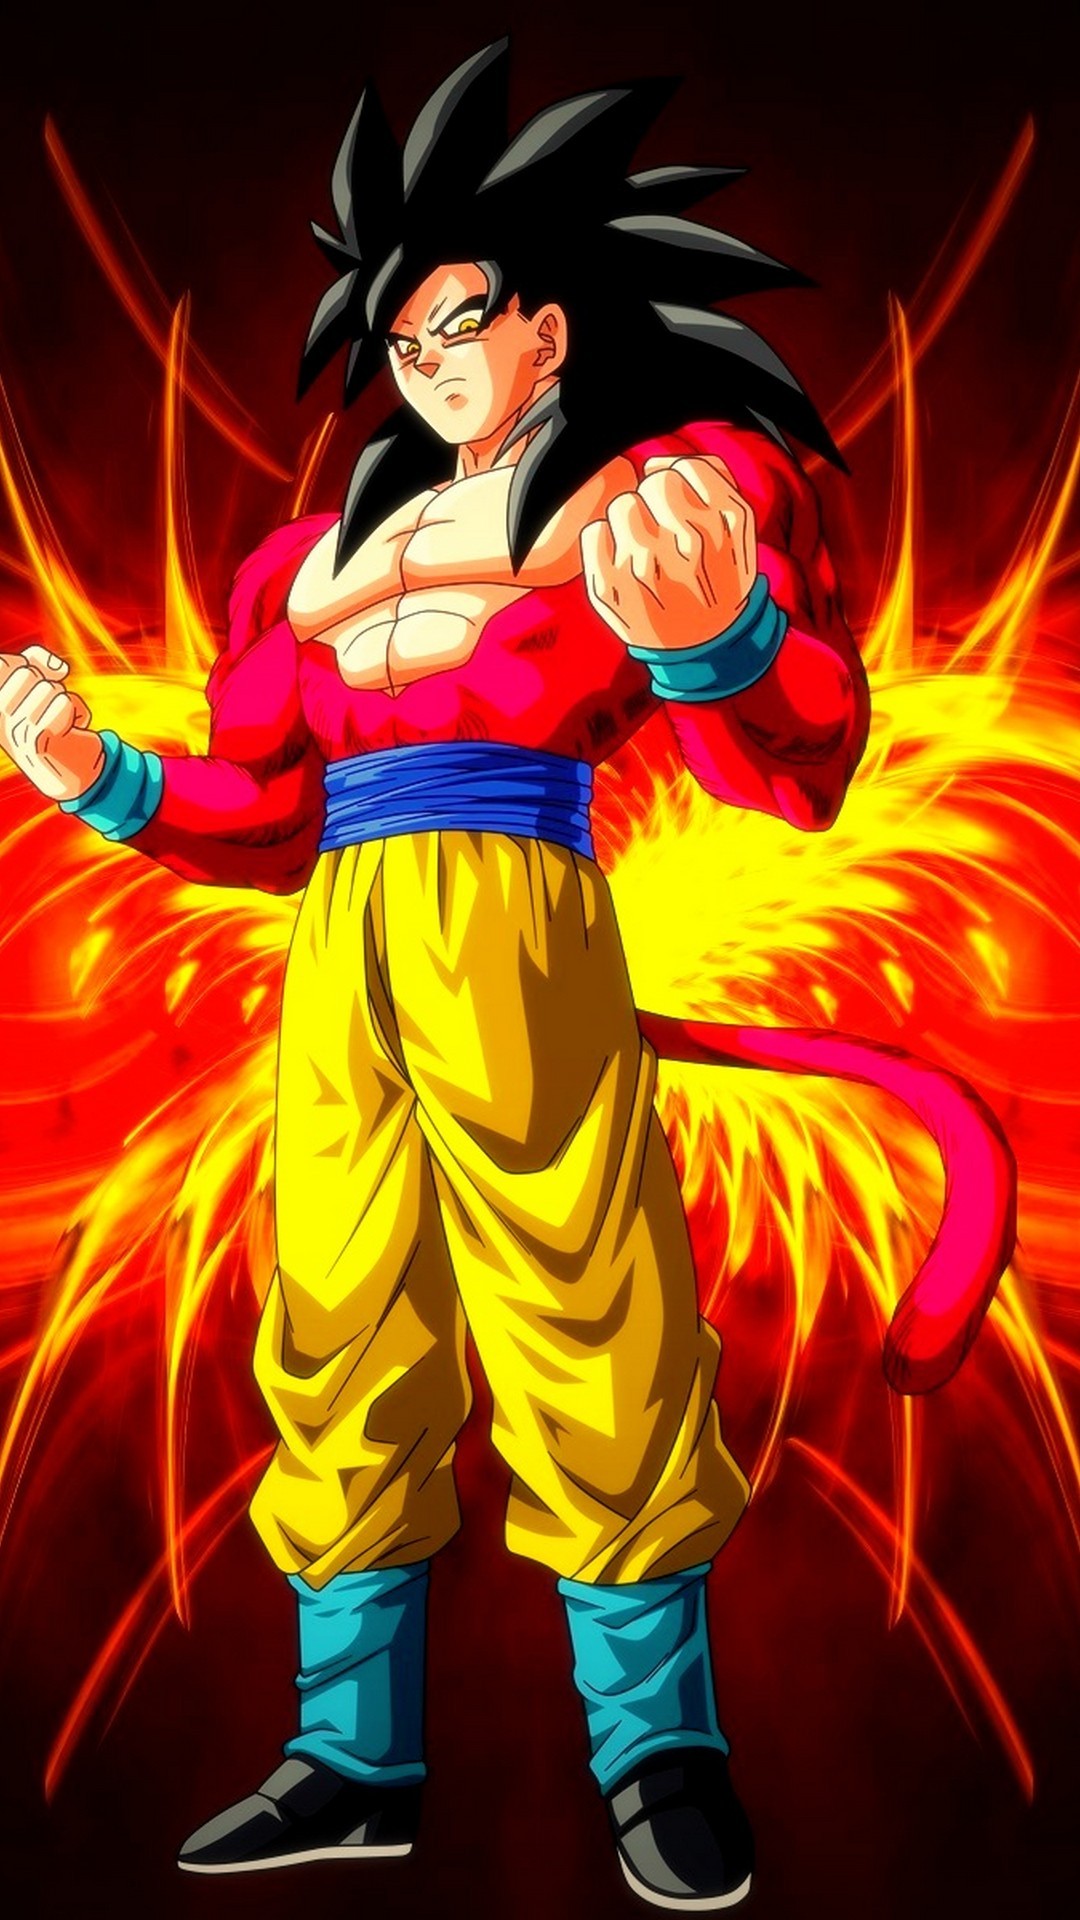 iPhone 8 Wallpaper Goku SSJ4 with image resolution 1080x1920 pixel. You can make this wallpaper for your iPhone 5, 6, 7, 8, X backgrounds, Mobile Screensaver, or iPad Lock Screen